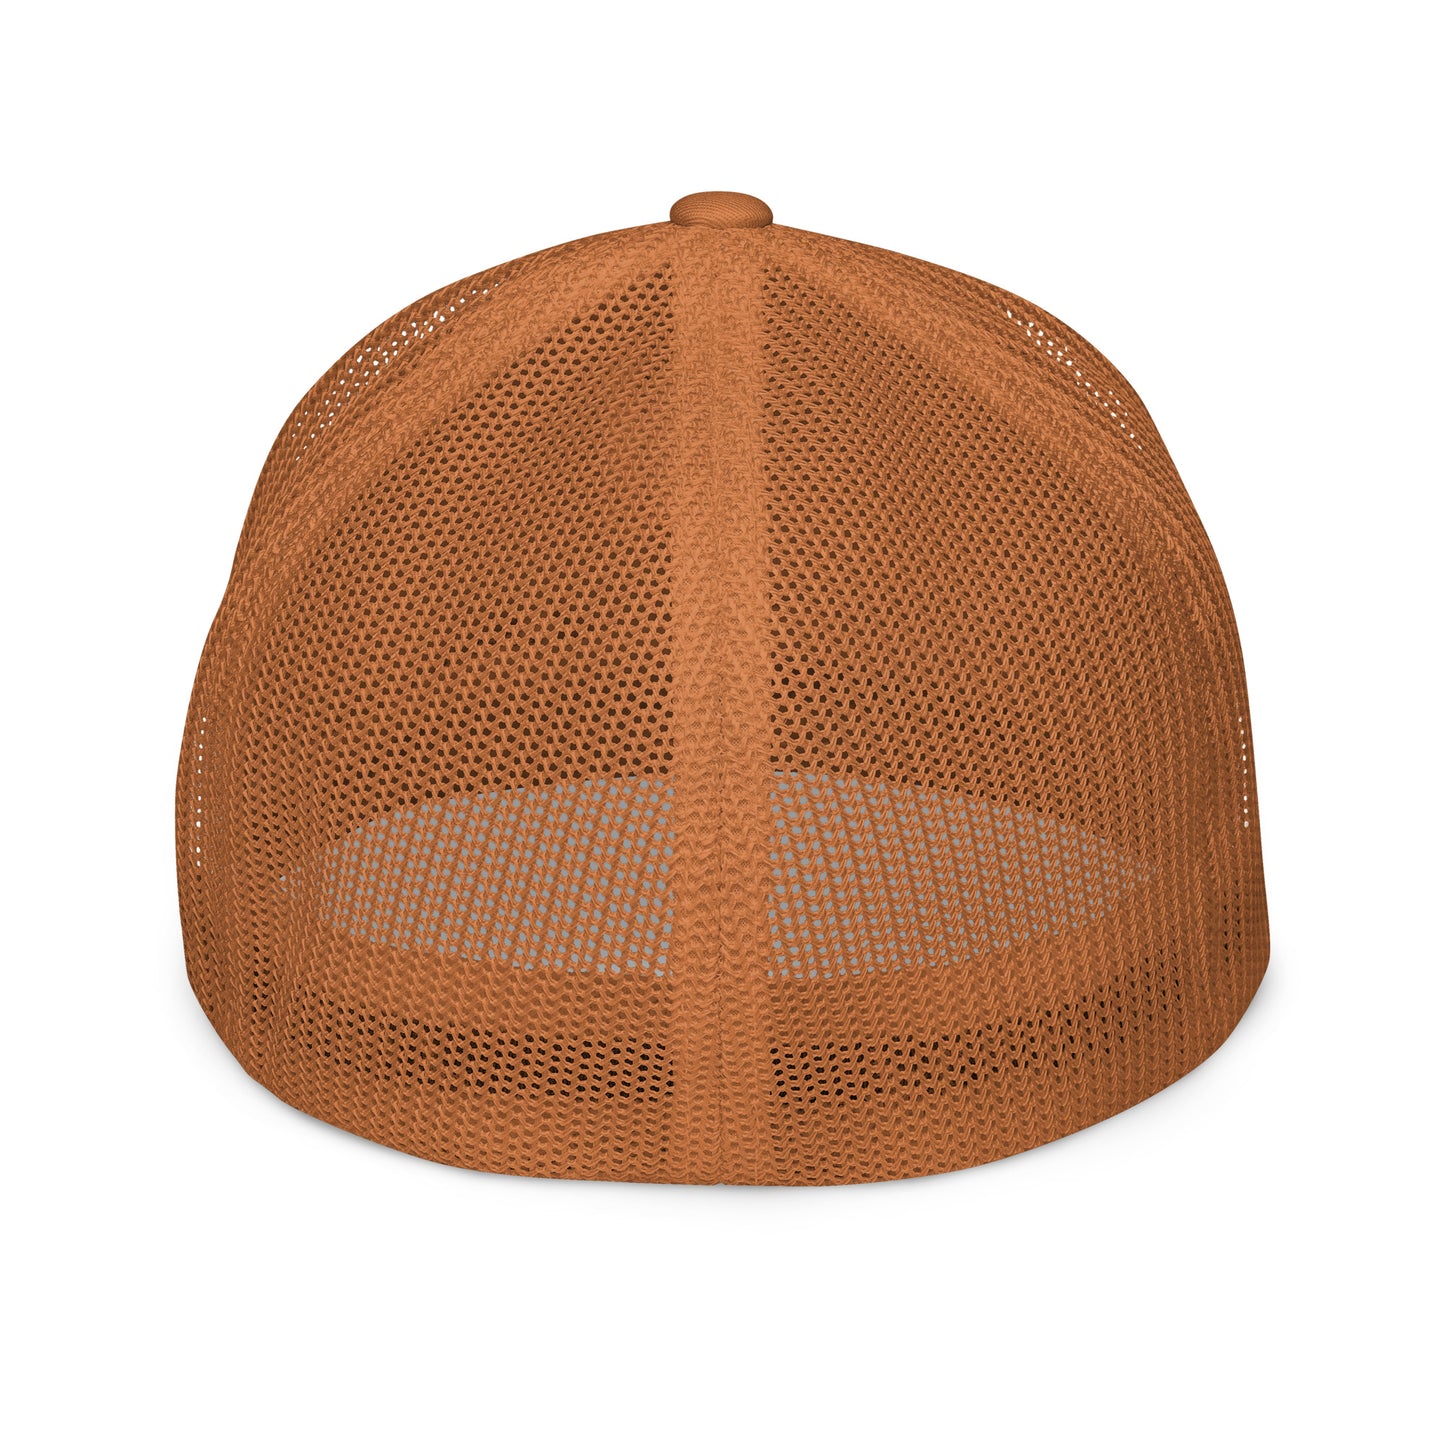 Closed-back trucker cap (ONE SIZE)